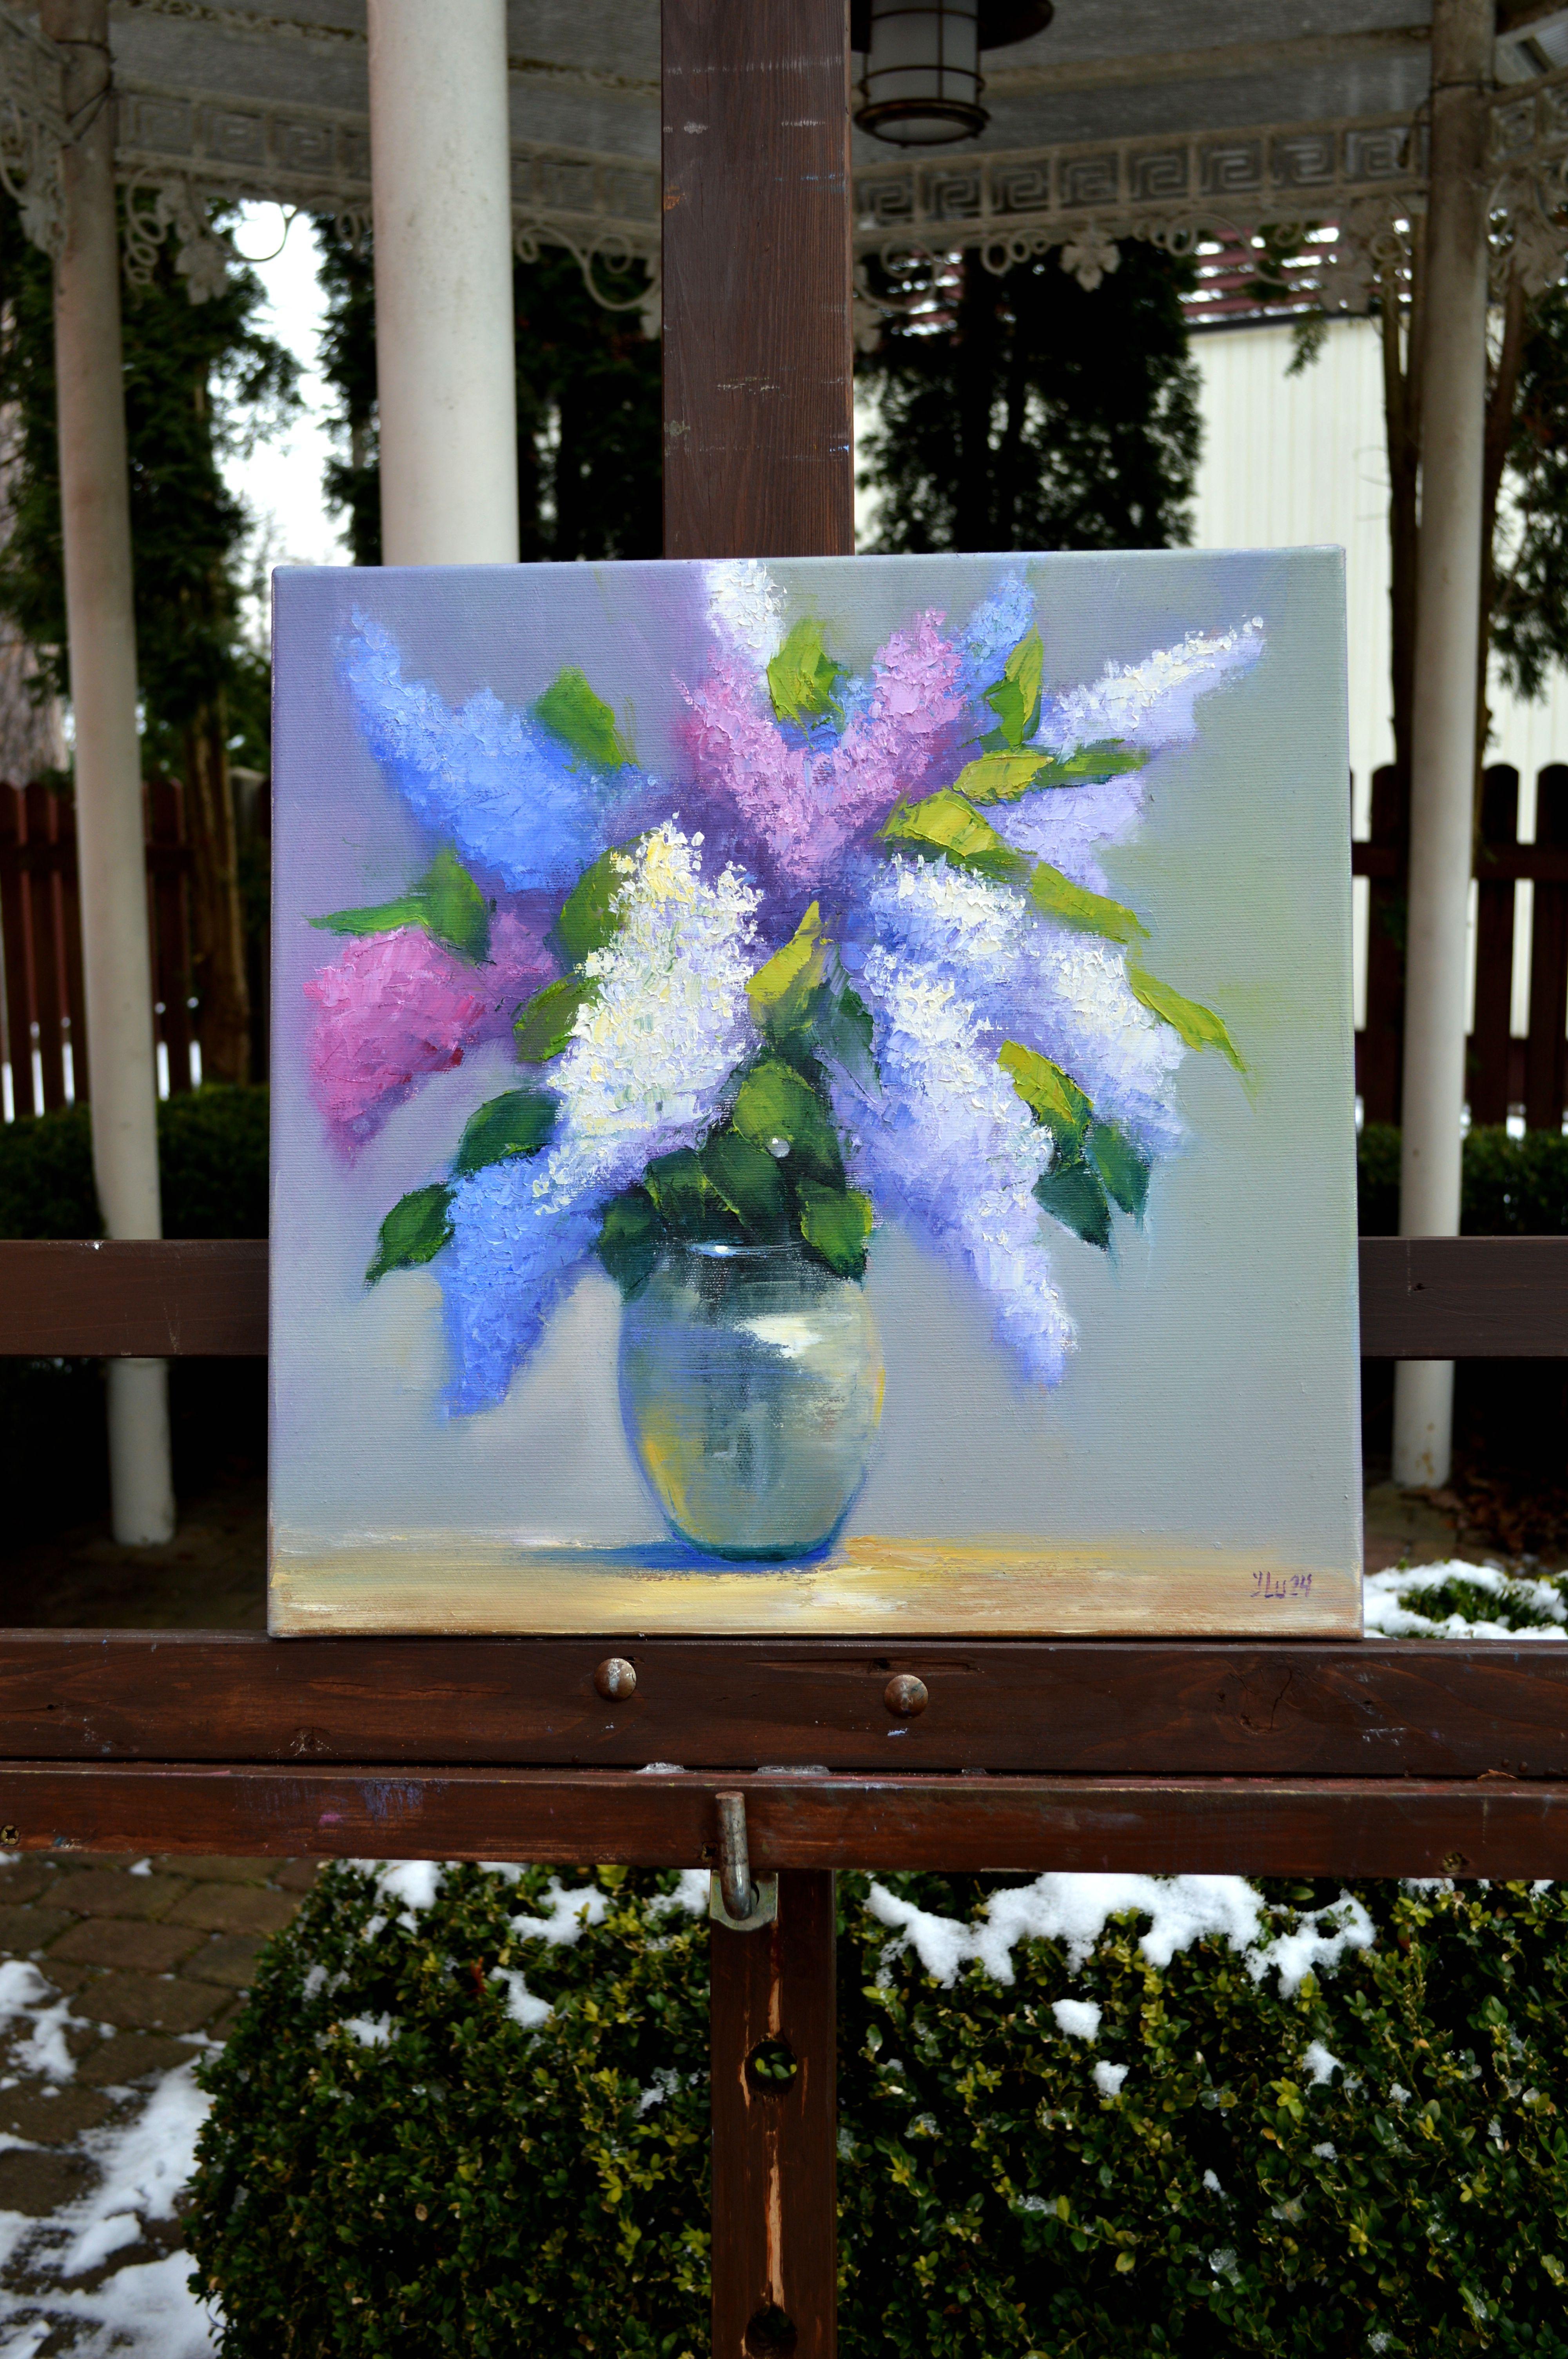 In this oil on canvas, I've poured my soul into capturing the delicate dance of lilacs, their colors bursting with life. Each stroke represents an emotion, a breath of passion. I melded the realism of nature's beauty with the raw energy of